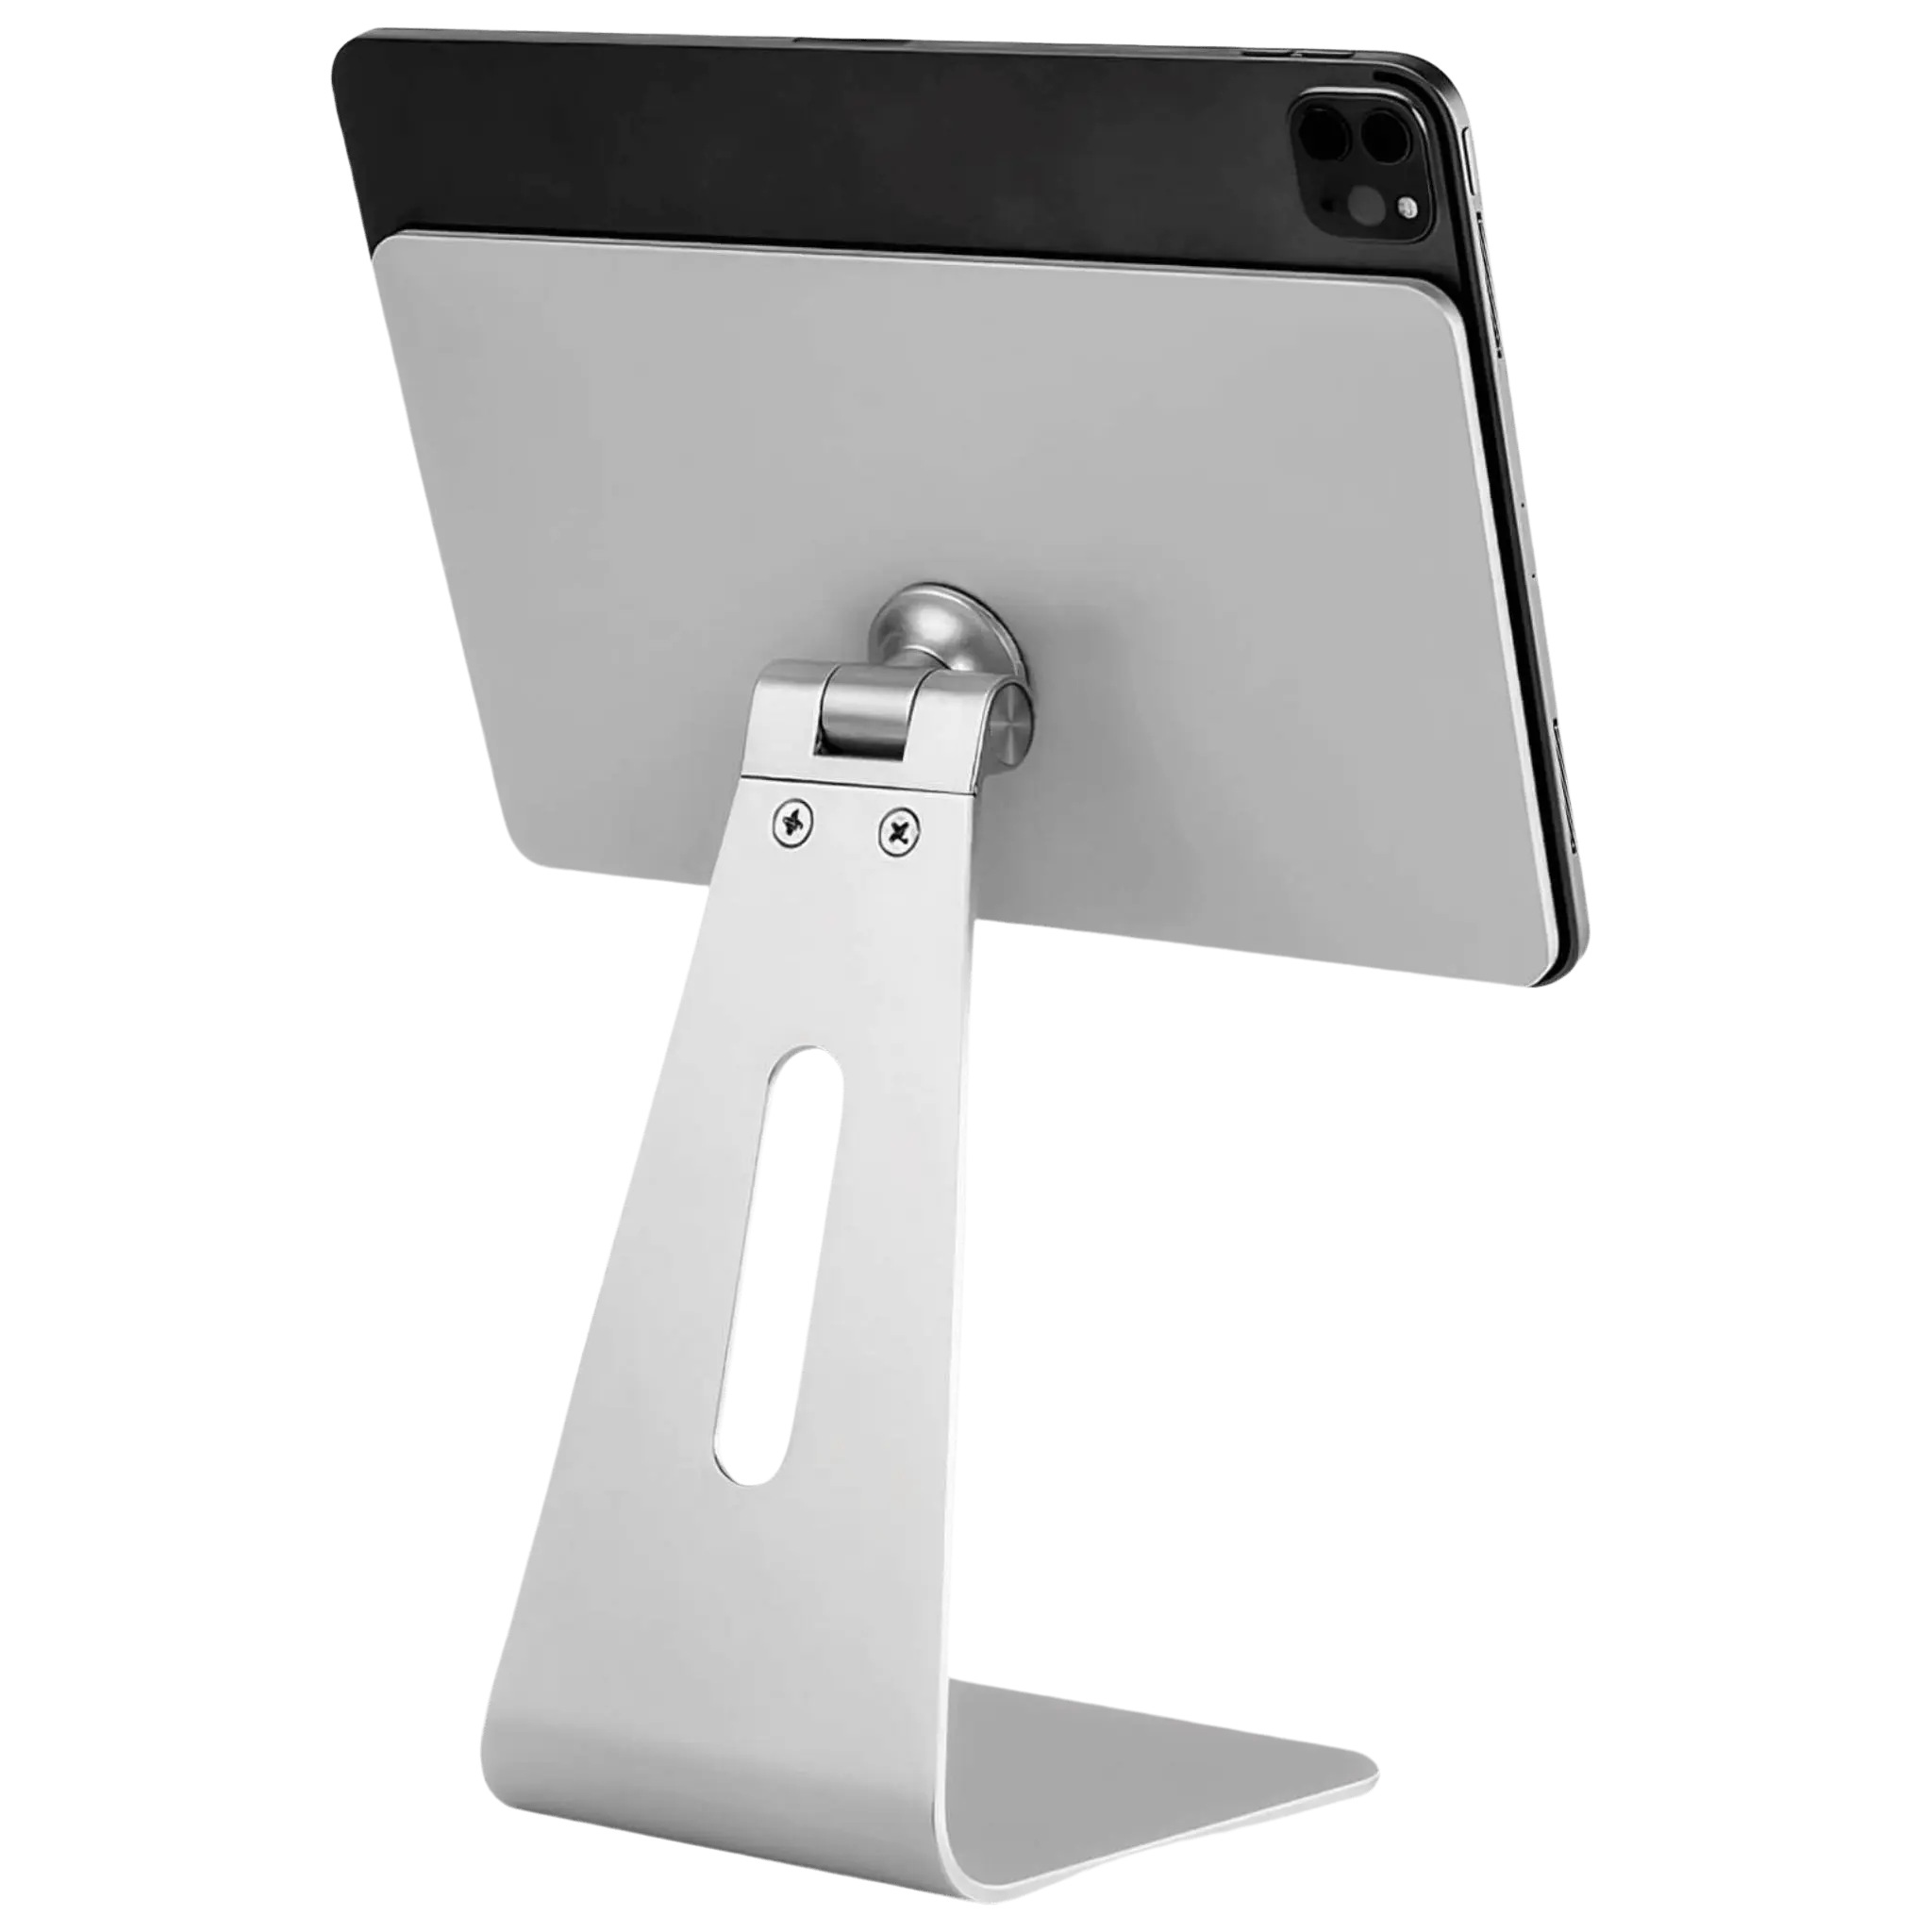 This iPad Mini 6 case offers MagSafe-like charging capability